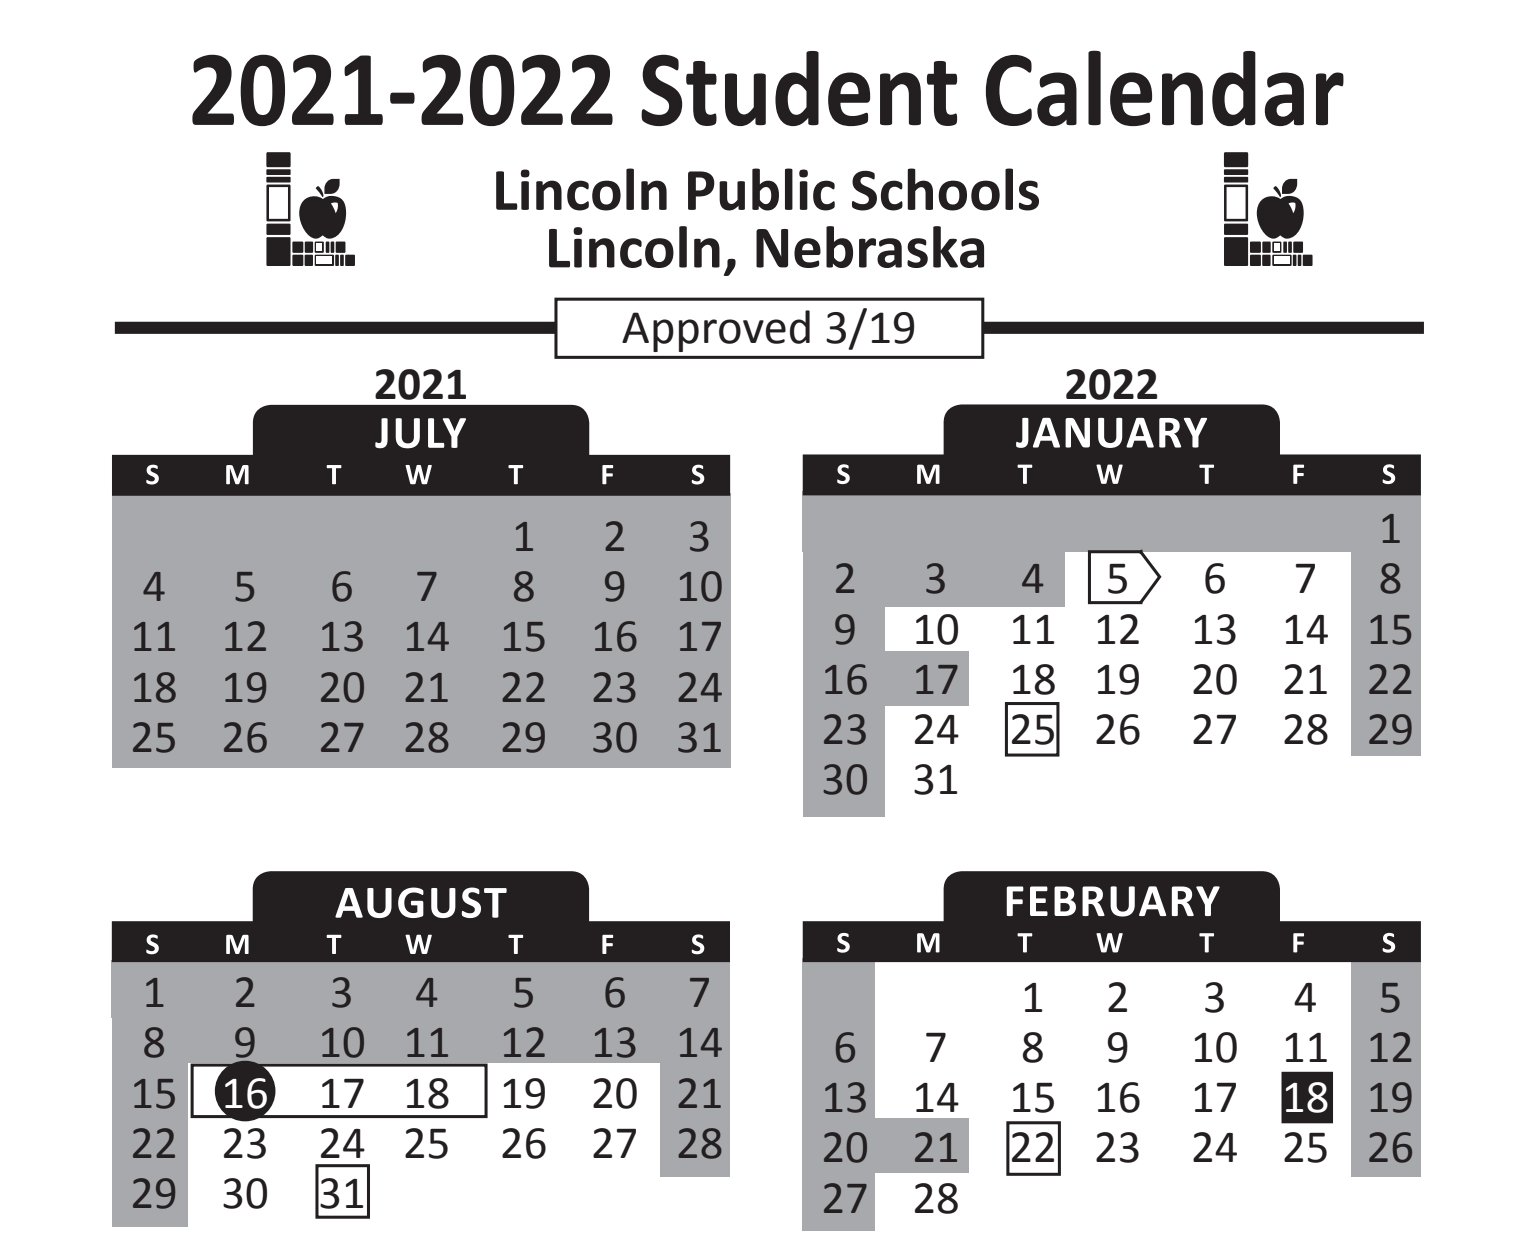 Lps Calendar 2022 North Star Hs On Twitter: "Gators! Check Out The Student Calendar For The  2021-2022 School Year. Https://T.co/Fjwl0Asxgt You Can Access The Entire  Folder Of Back To School Resources Here: Https://T.co/N64Bzmsbrs  Https://T.co/Sje8Aphani" /